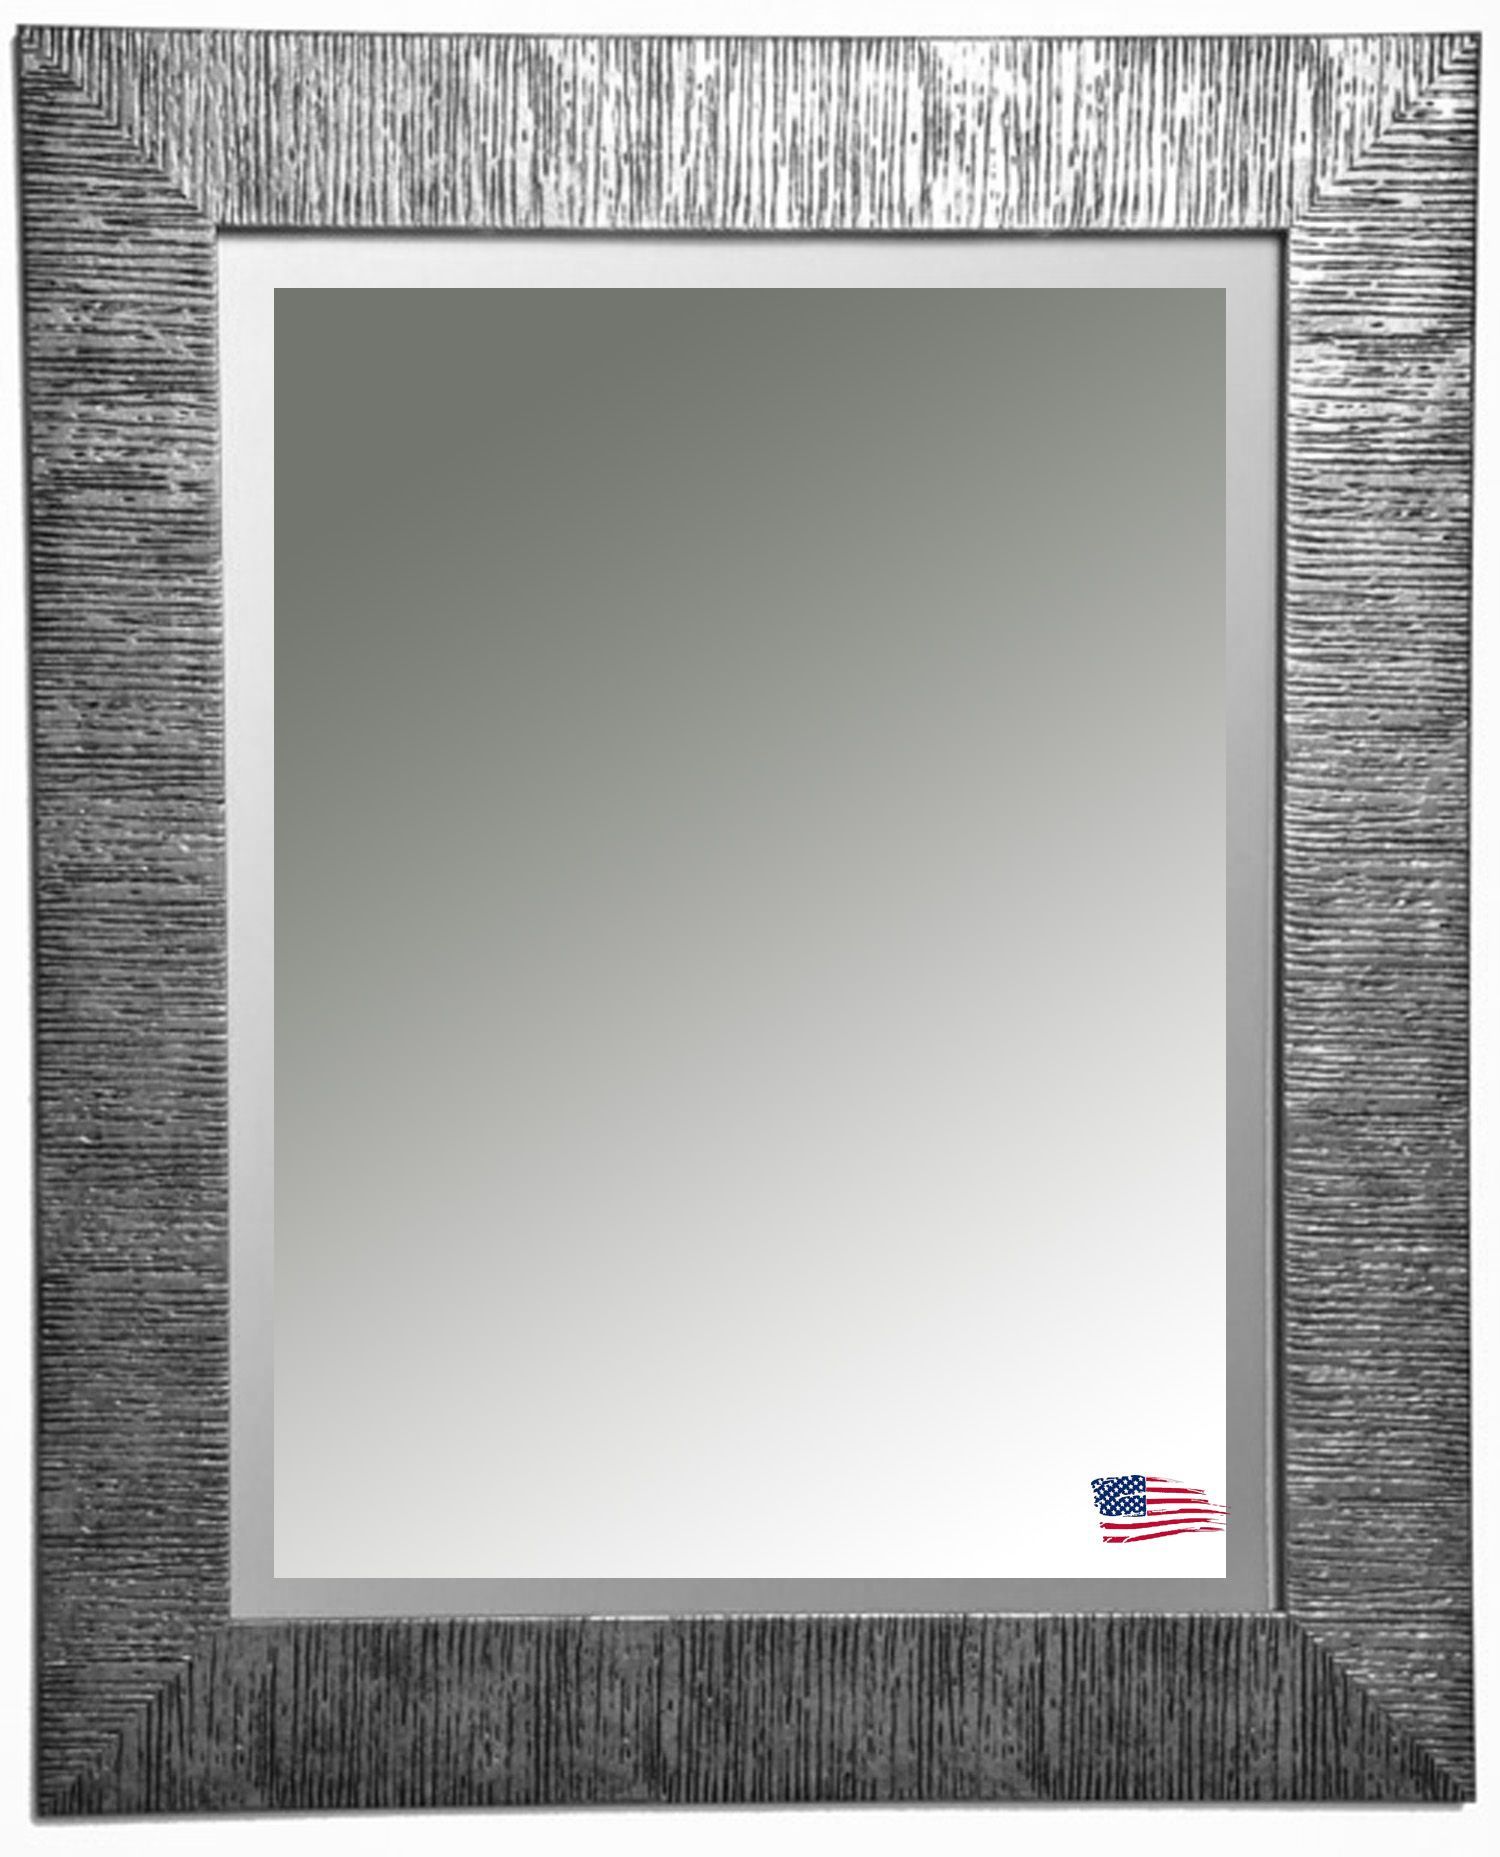 New Stylerayne Mirrors, Safari Inspired Silver Textured Within American Made Accent Wall Mirrors (View 20 of 20)